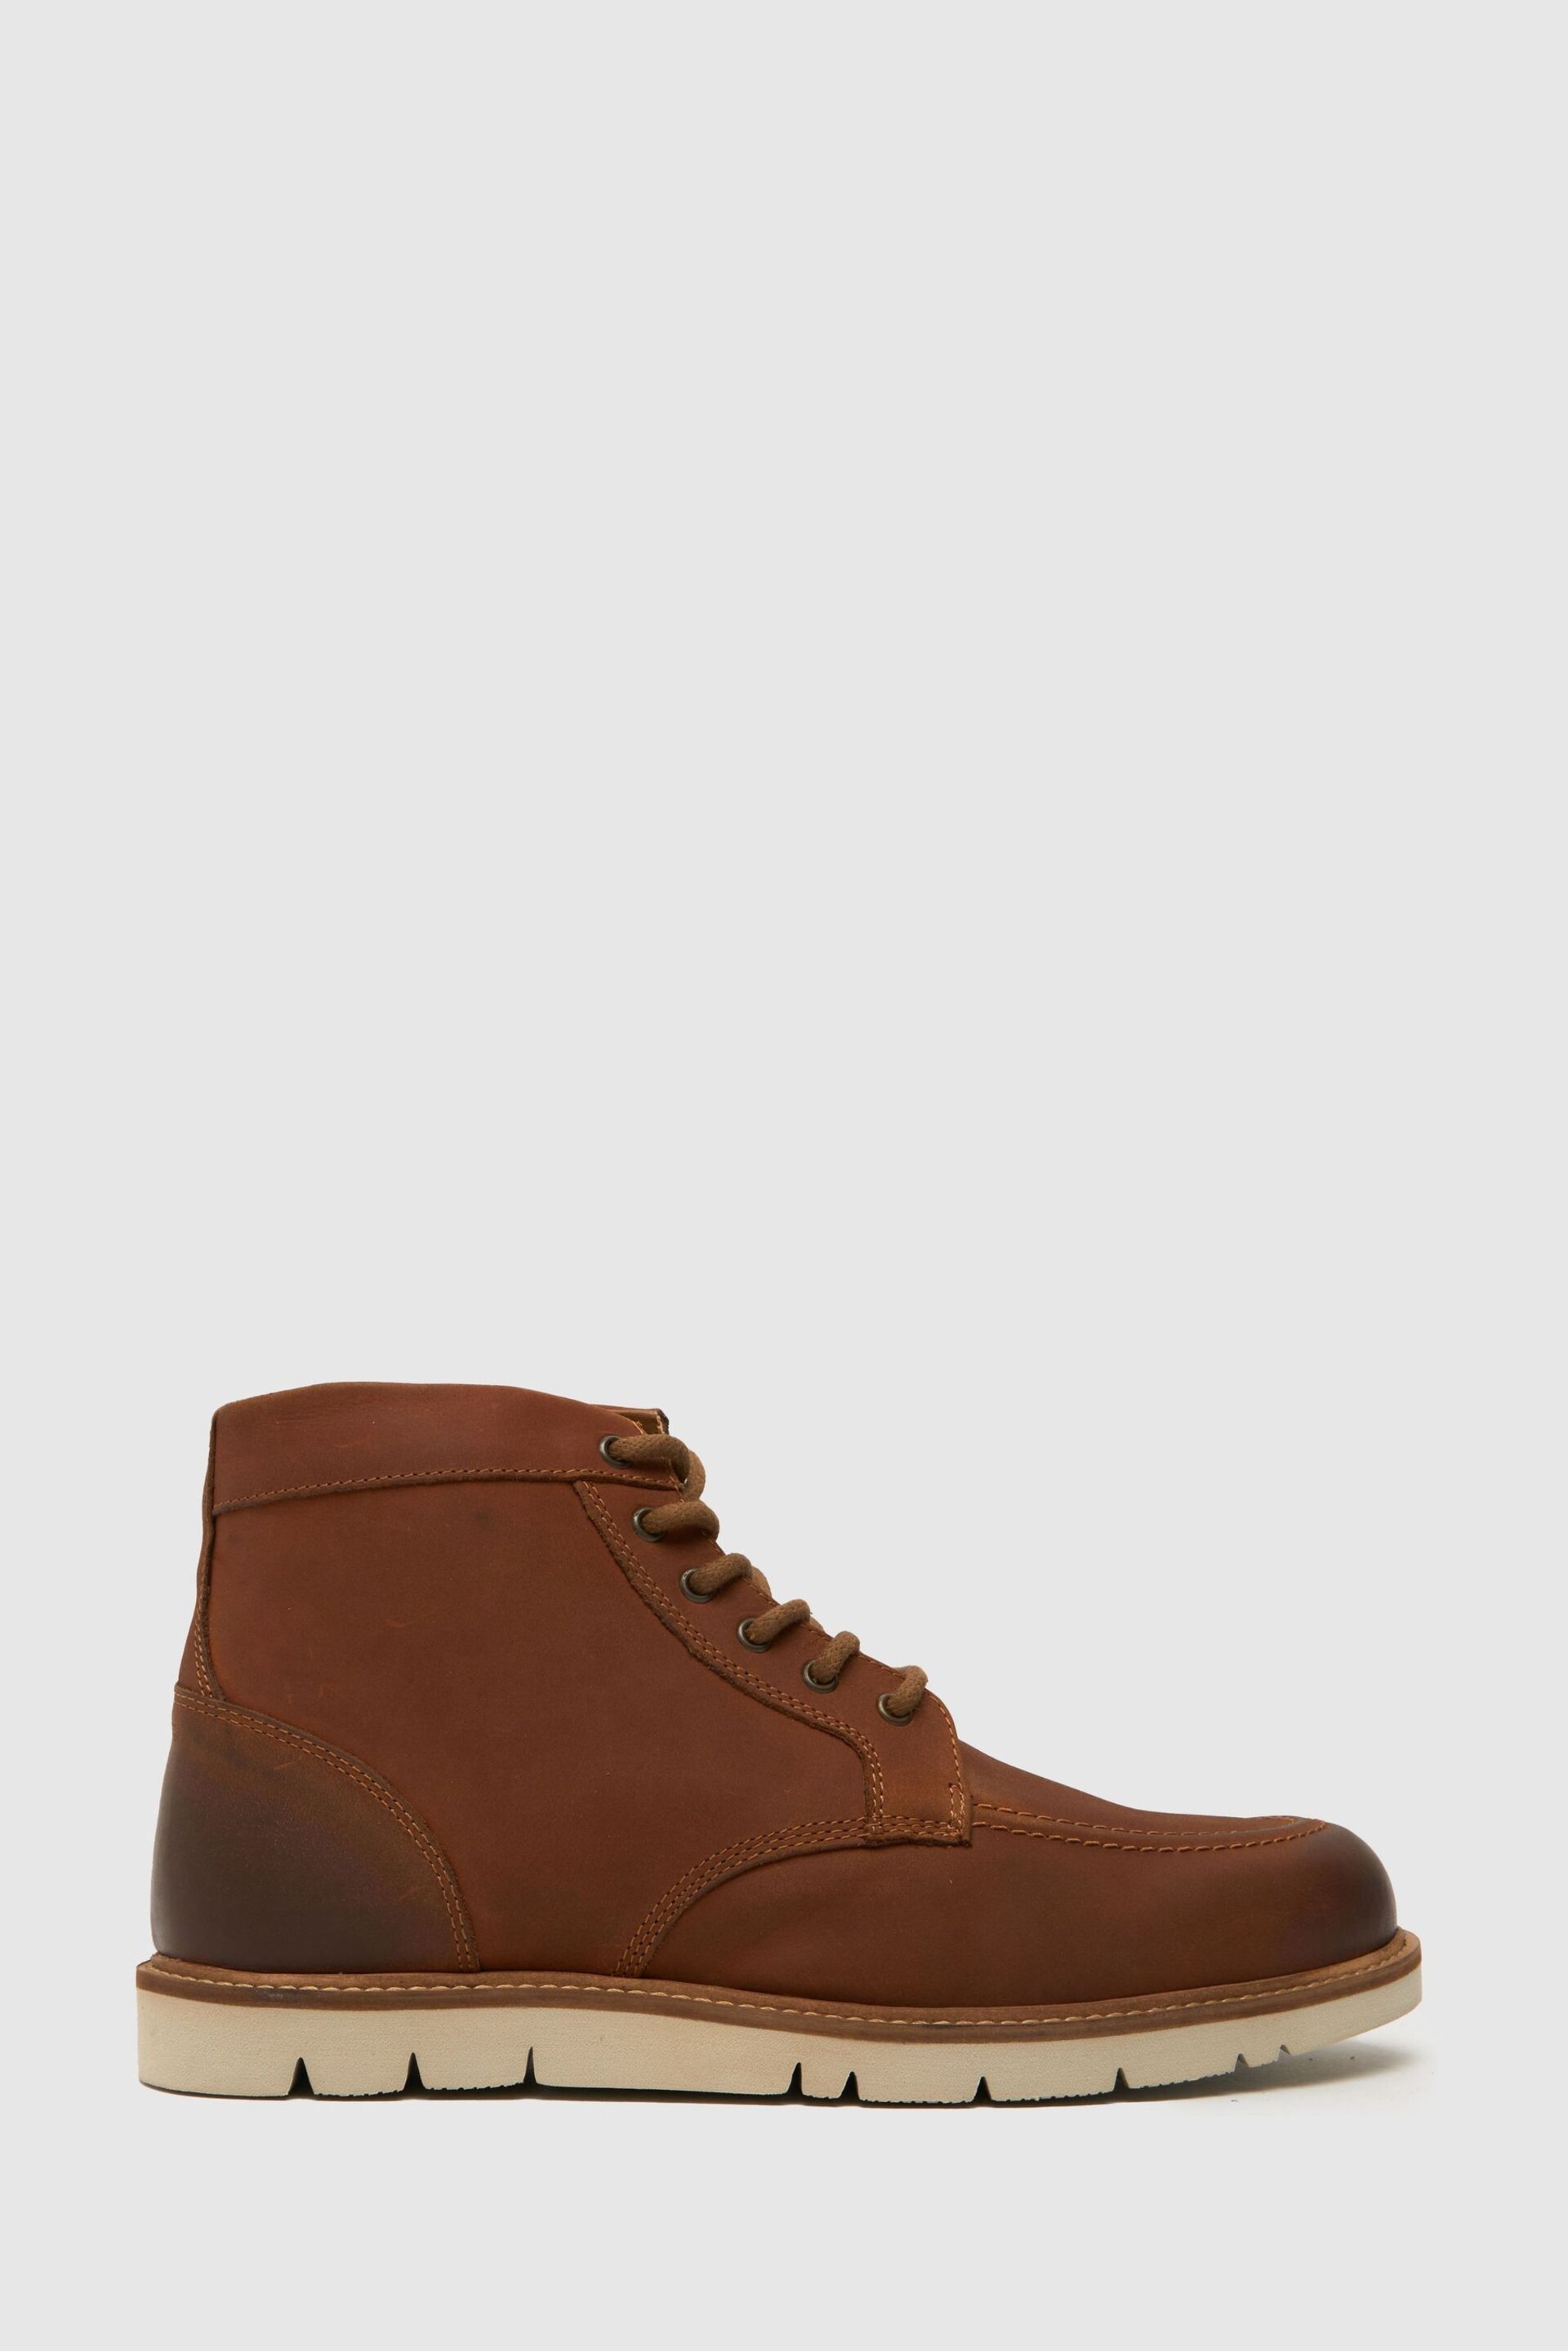 Schuh Daxton Brown Moccasin Boots - Image 1 of 4